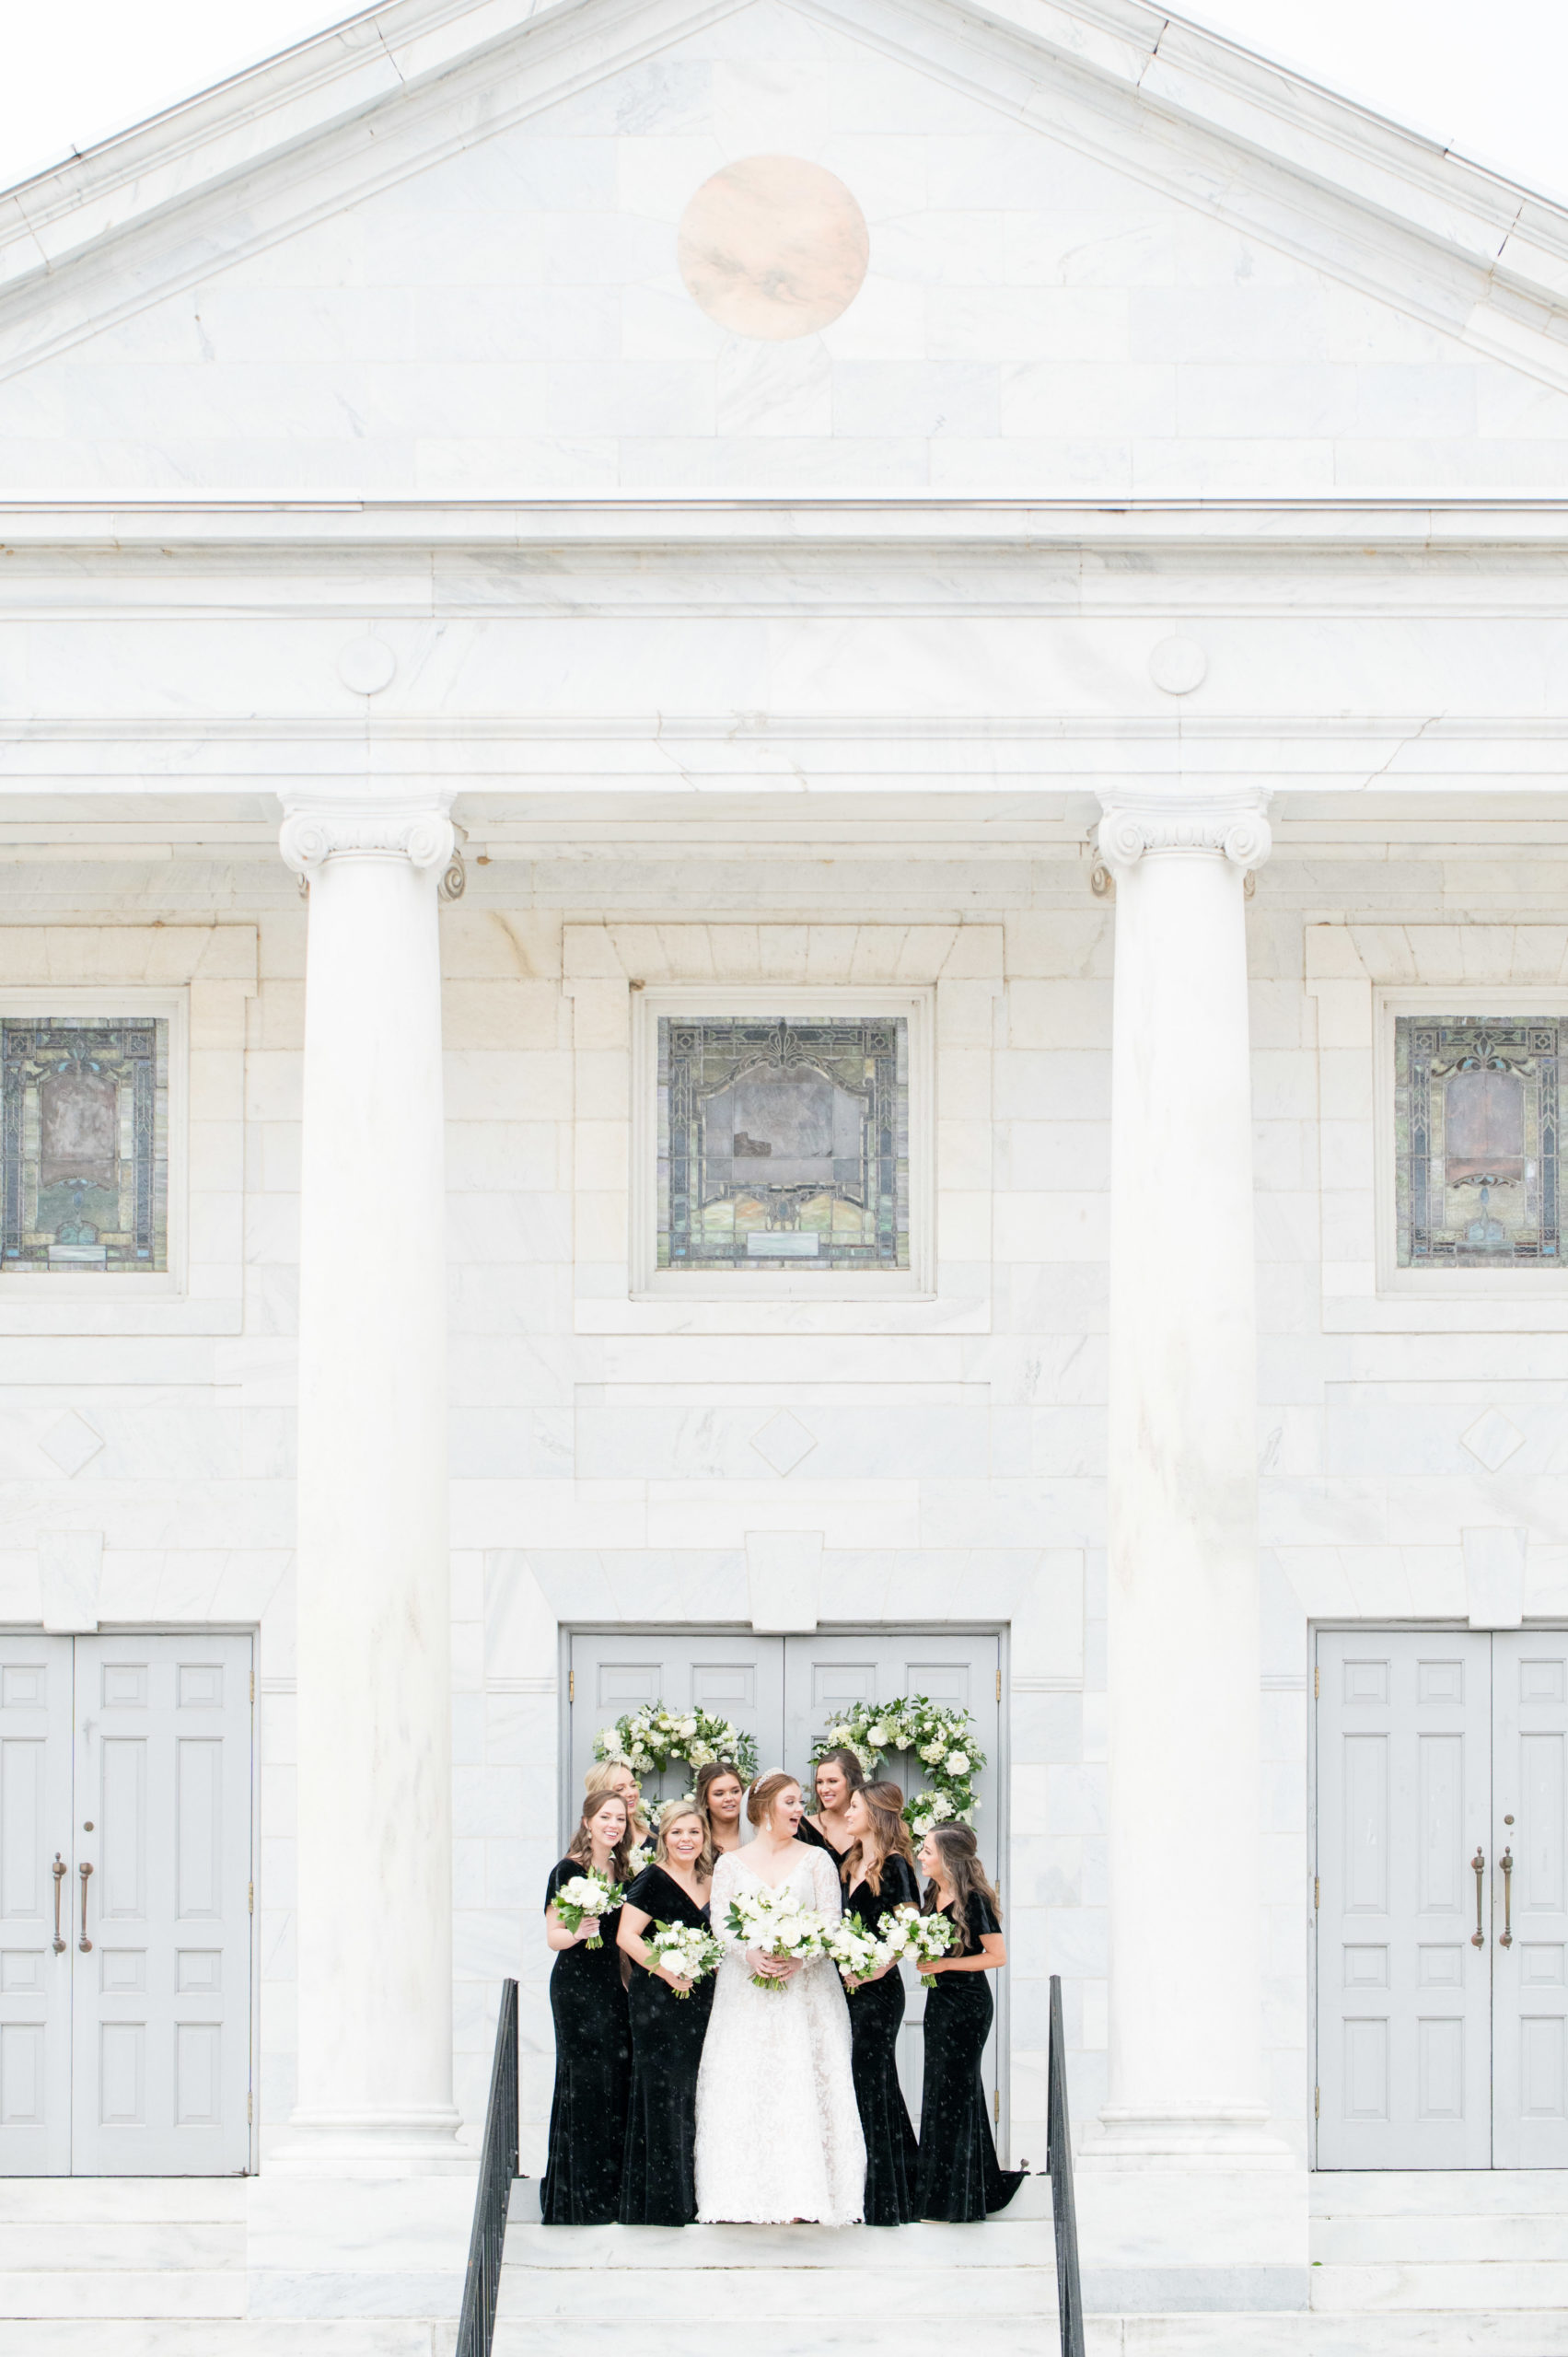 Bride and bridesmaids laugh together.